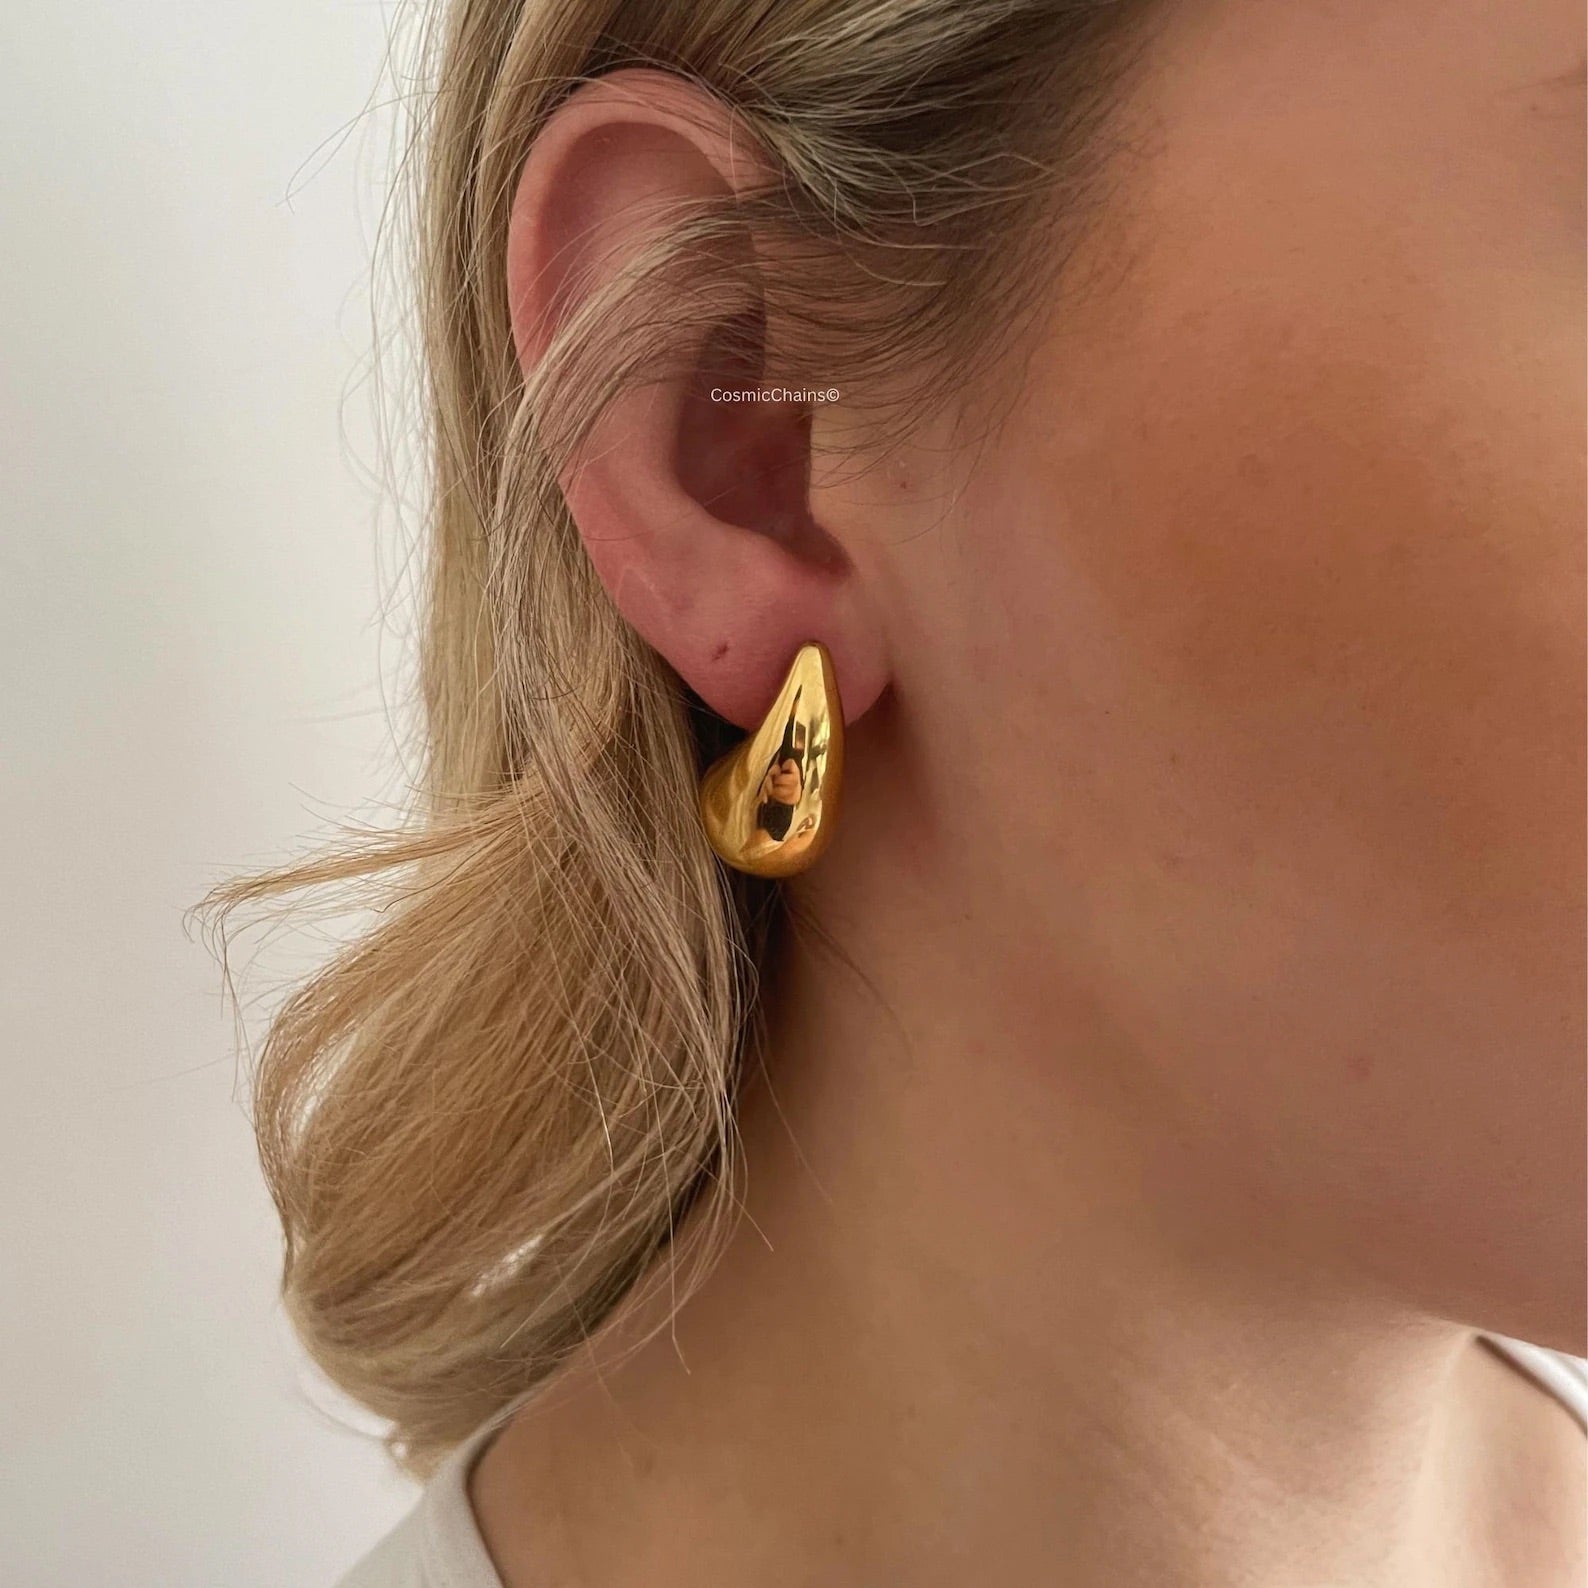 Fashionable tear drop earrings for a chic look